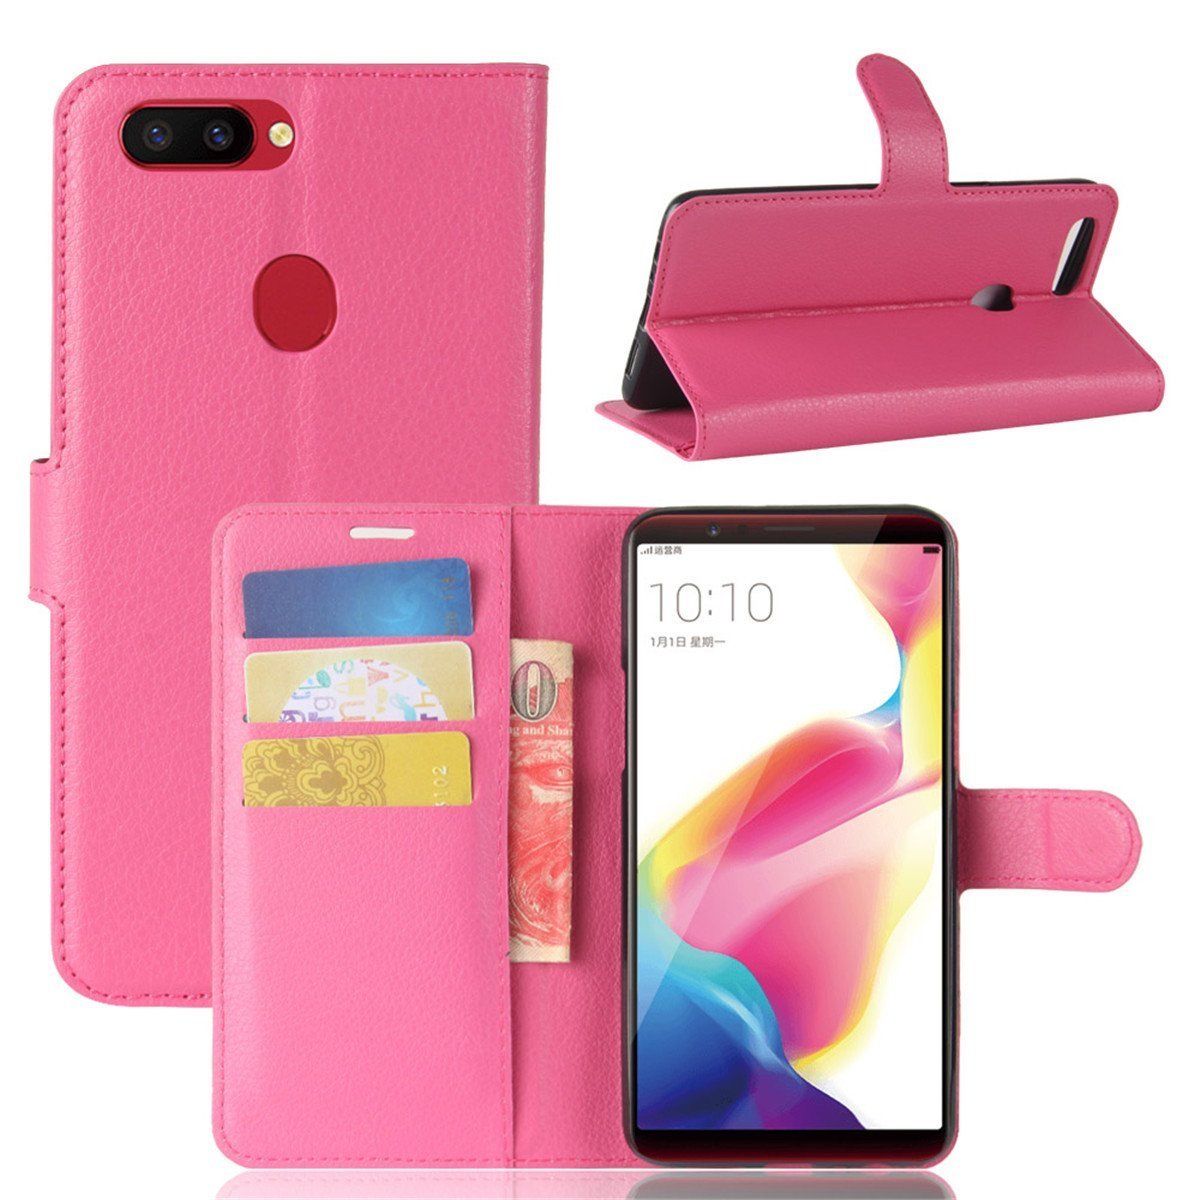 Oppo A57 Premium Leather Wallet Case Cover For Oppo Case-Hot Pink